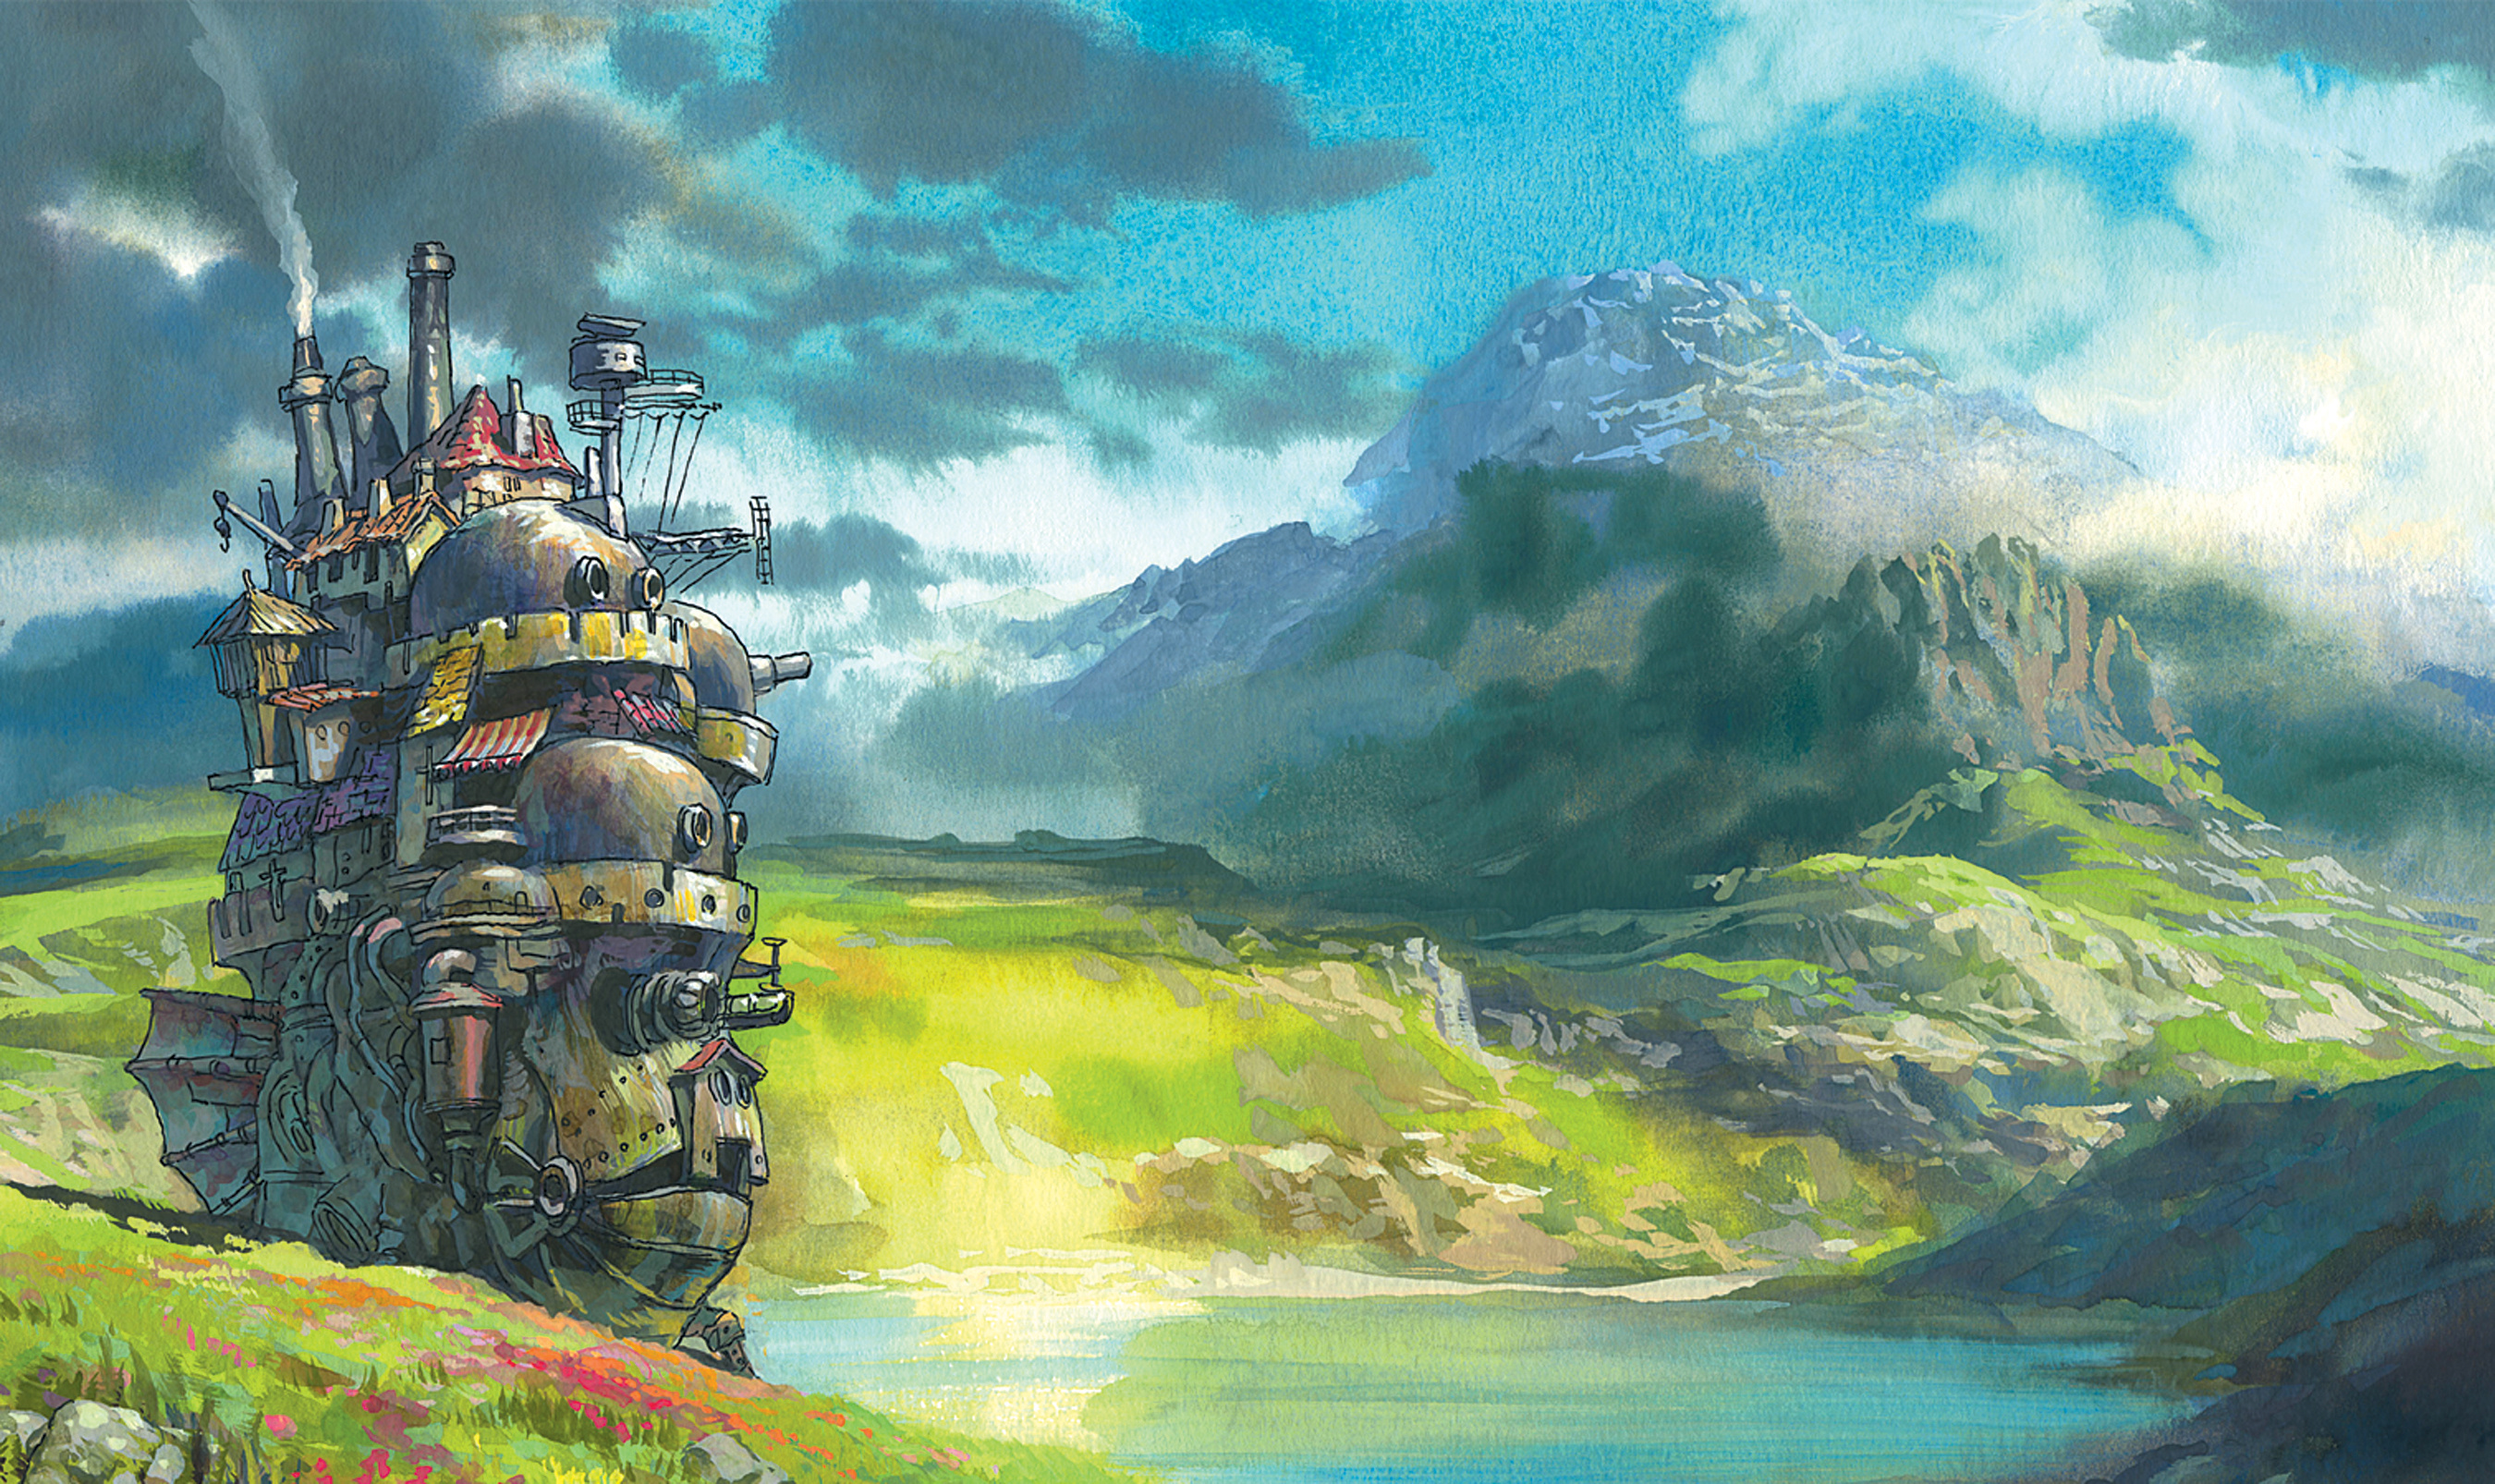 For Other Miyazaki Related Post Click Here